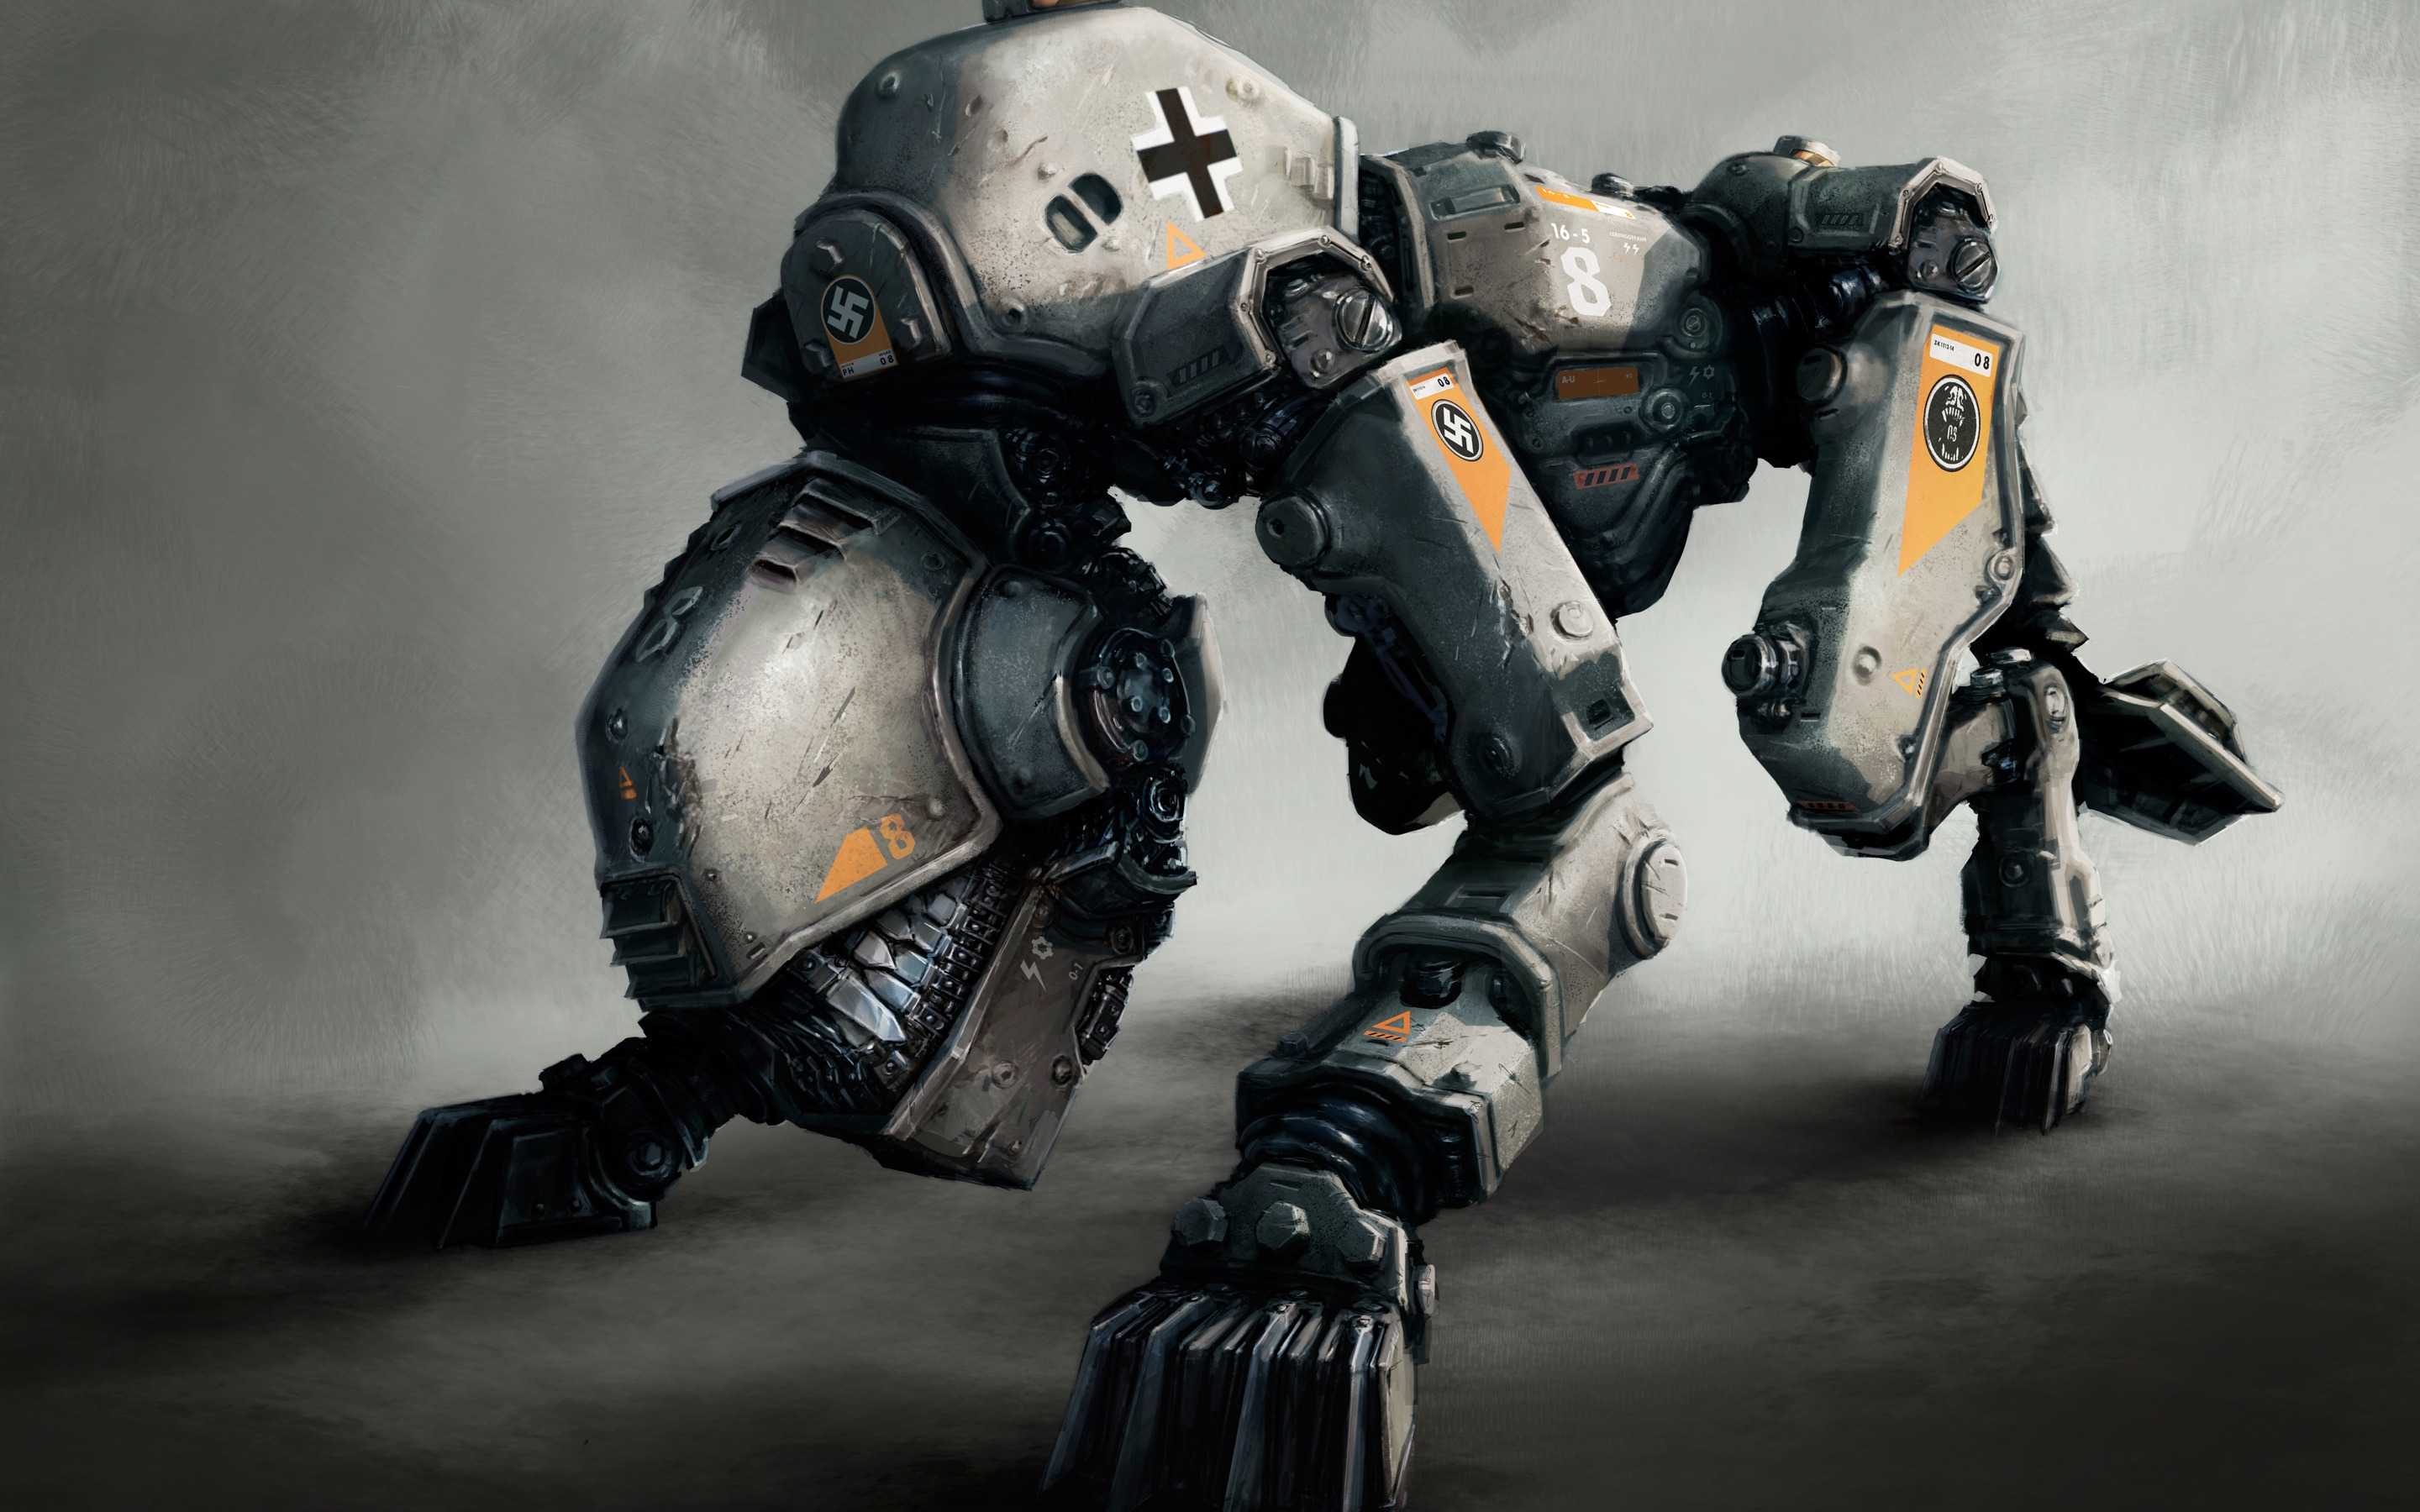 Robot from Wolfenstein The New Order for 2880 x 1800 Retina Display resolution